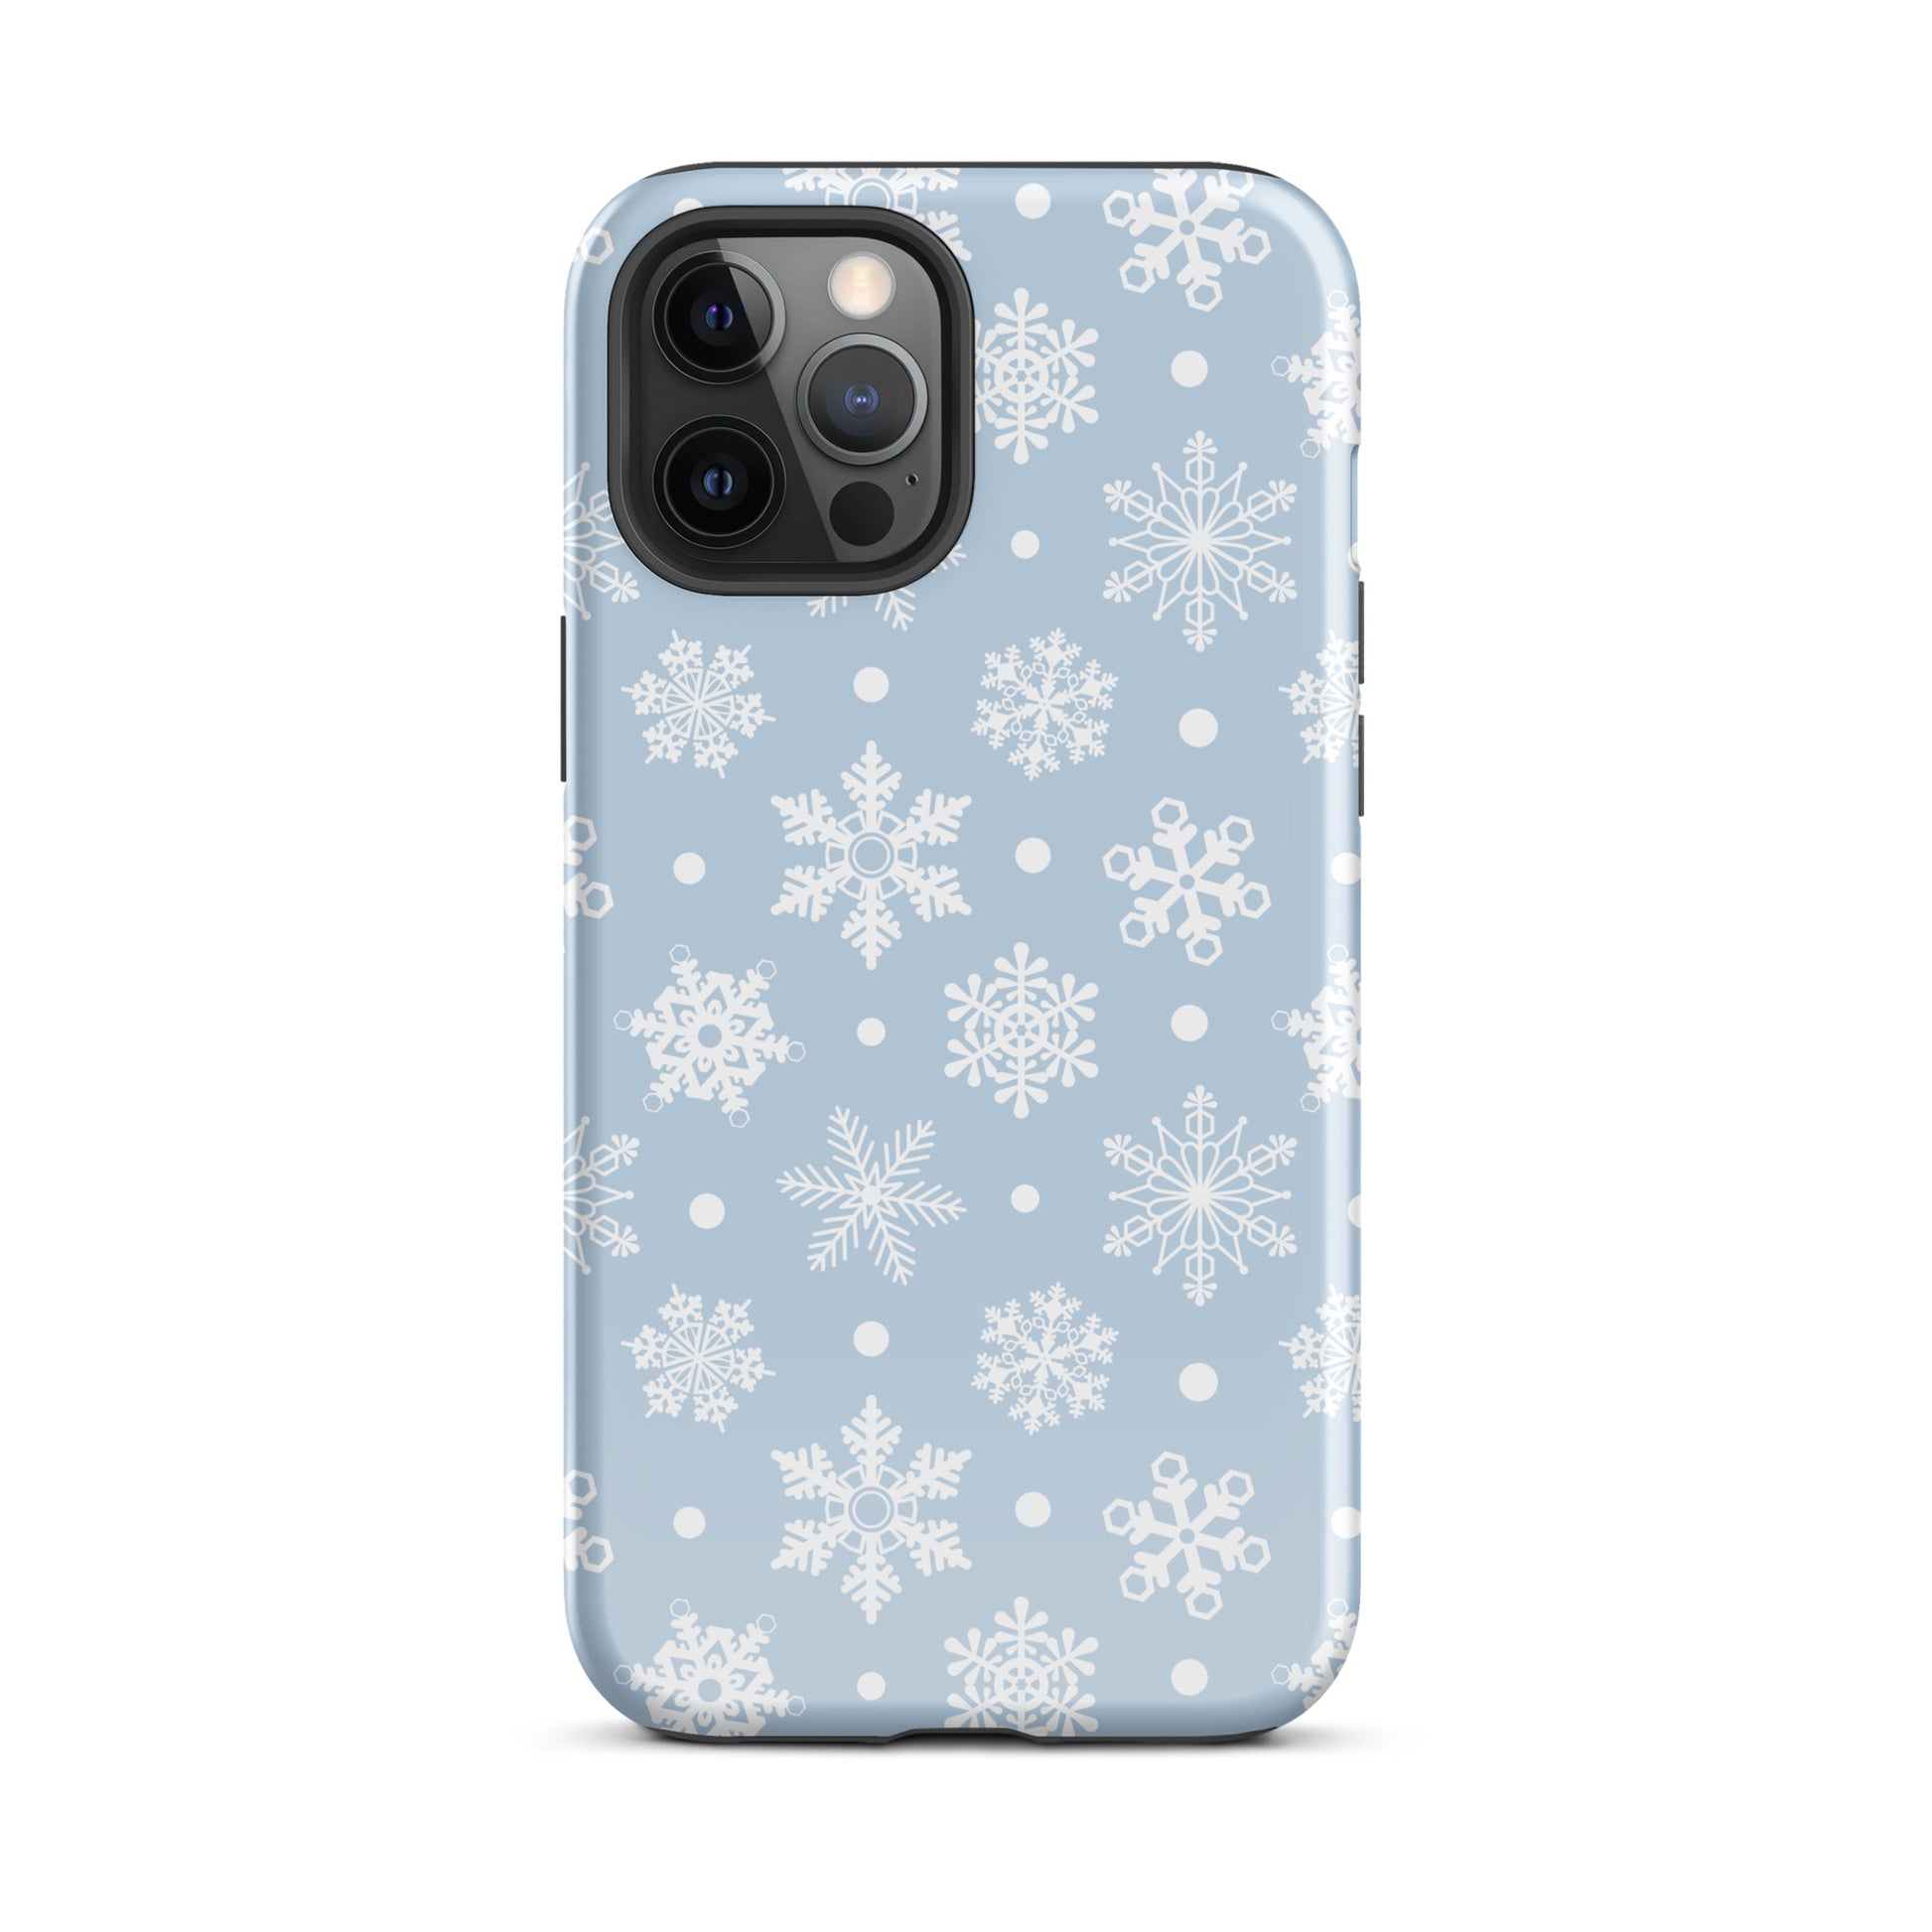 Snowflakes iPhone Case iPhone 12 Pro Max Glossy